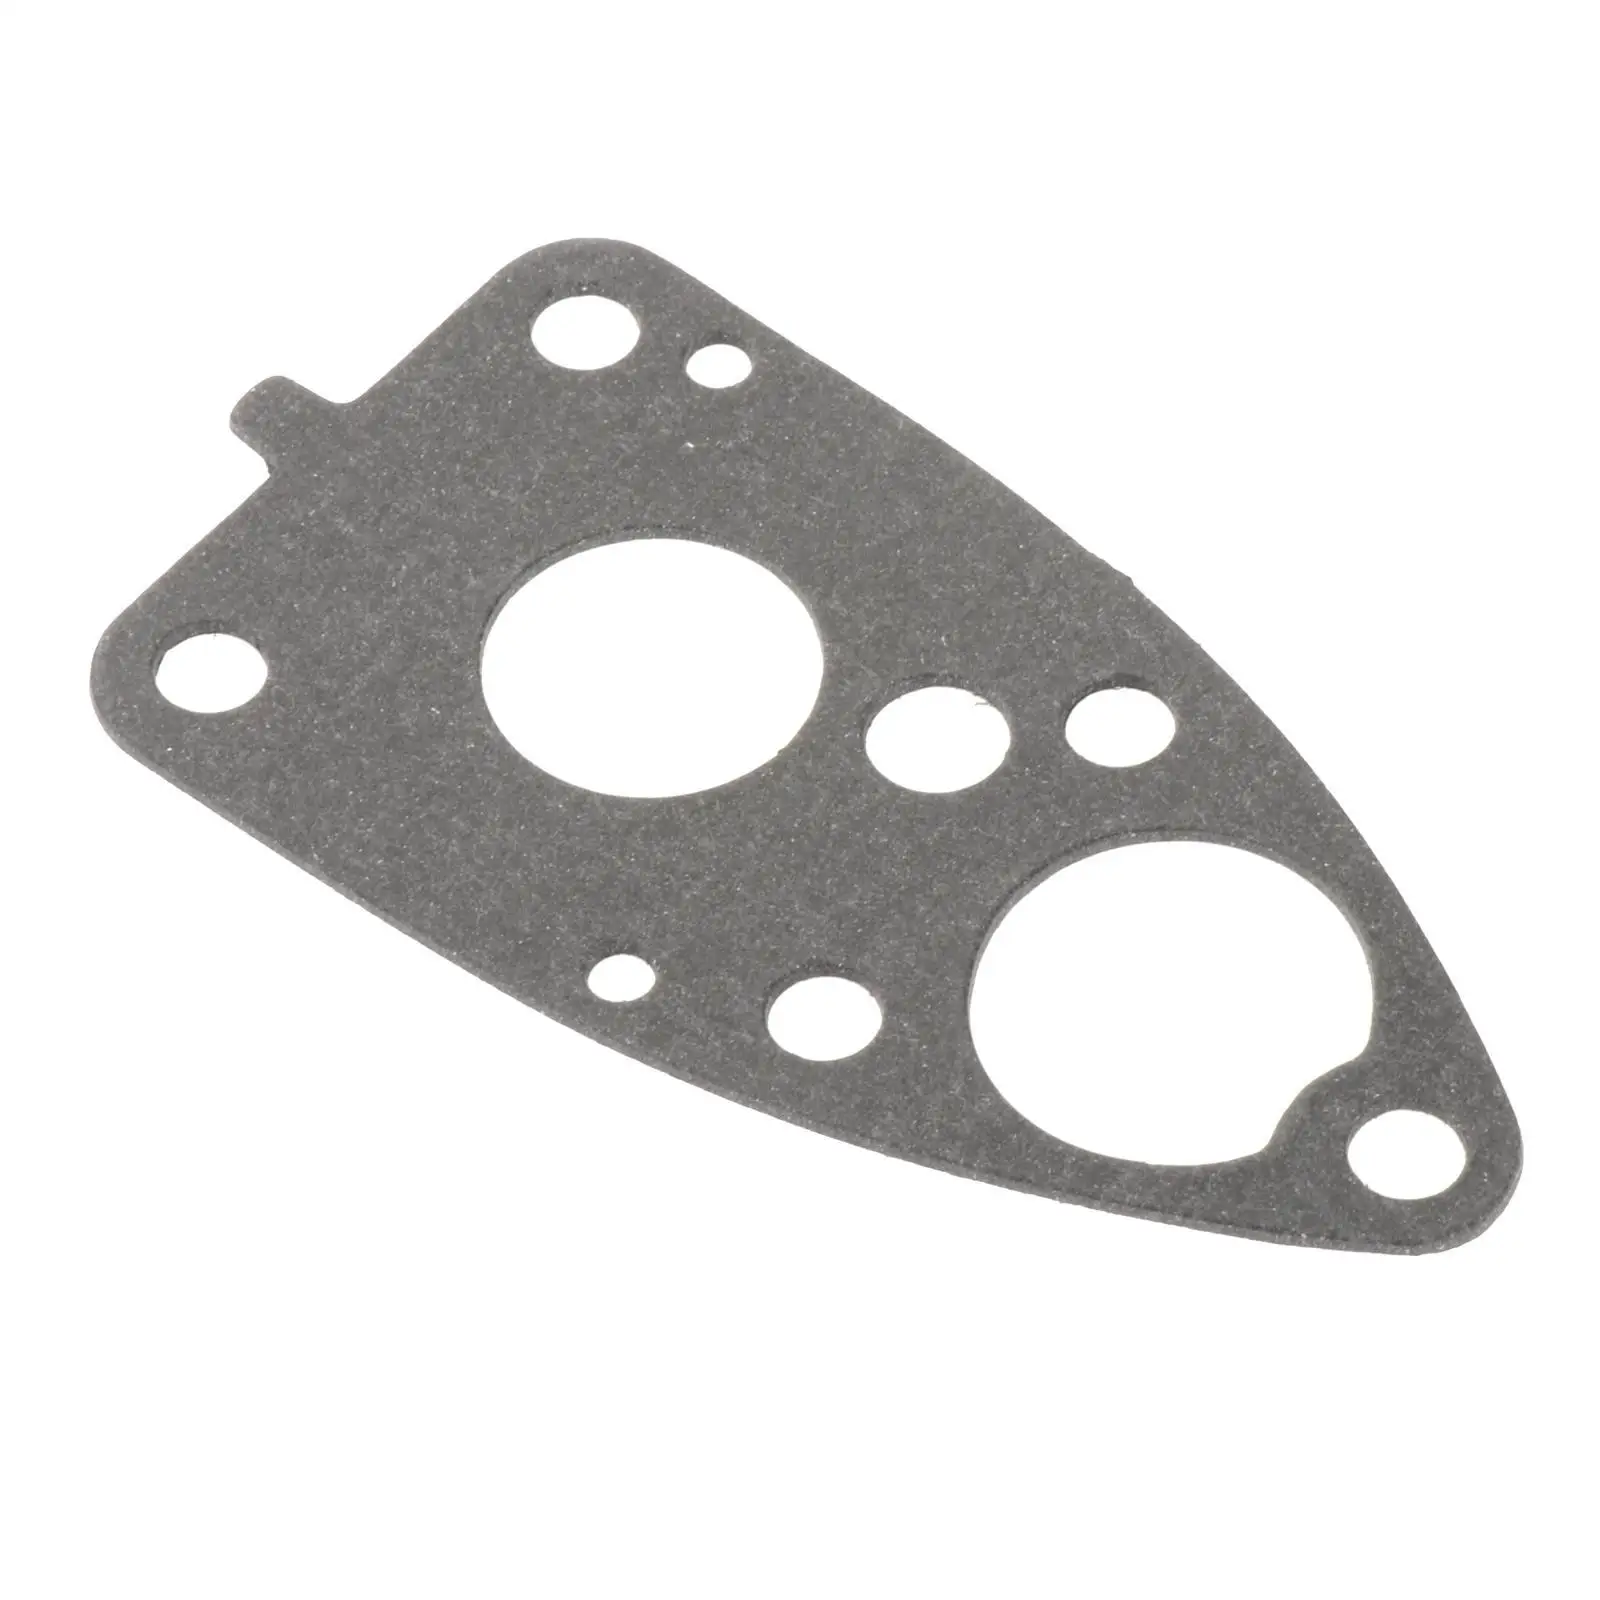 Packing Lower Case, Silver Parts Accessories Water Pump Plate Fits for Yamaha F4A 4A 4B 5C 6E0-45315-A0-00 Outboard Engine